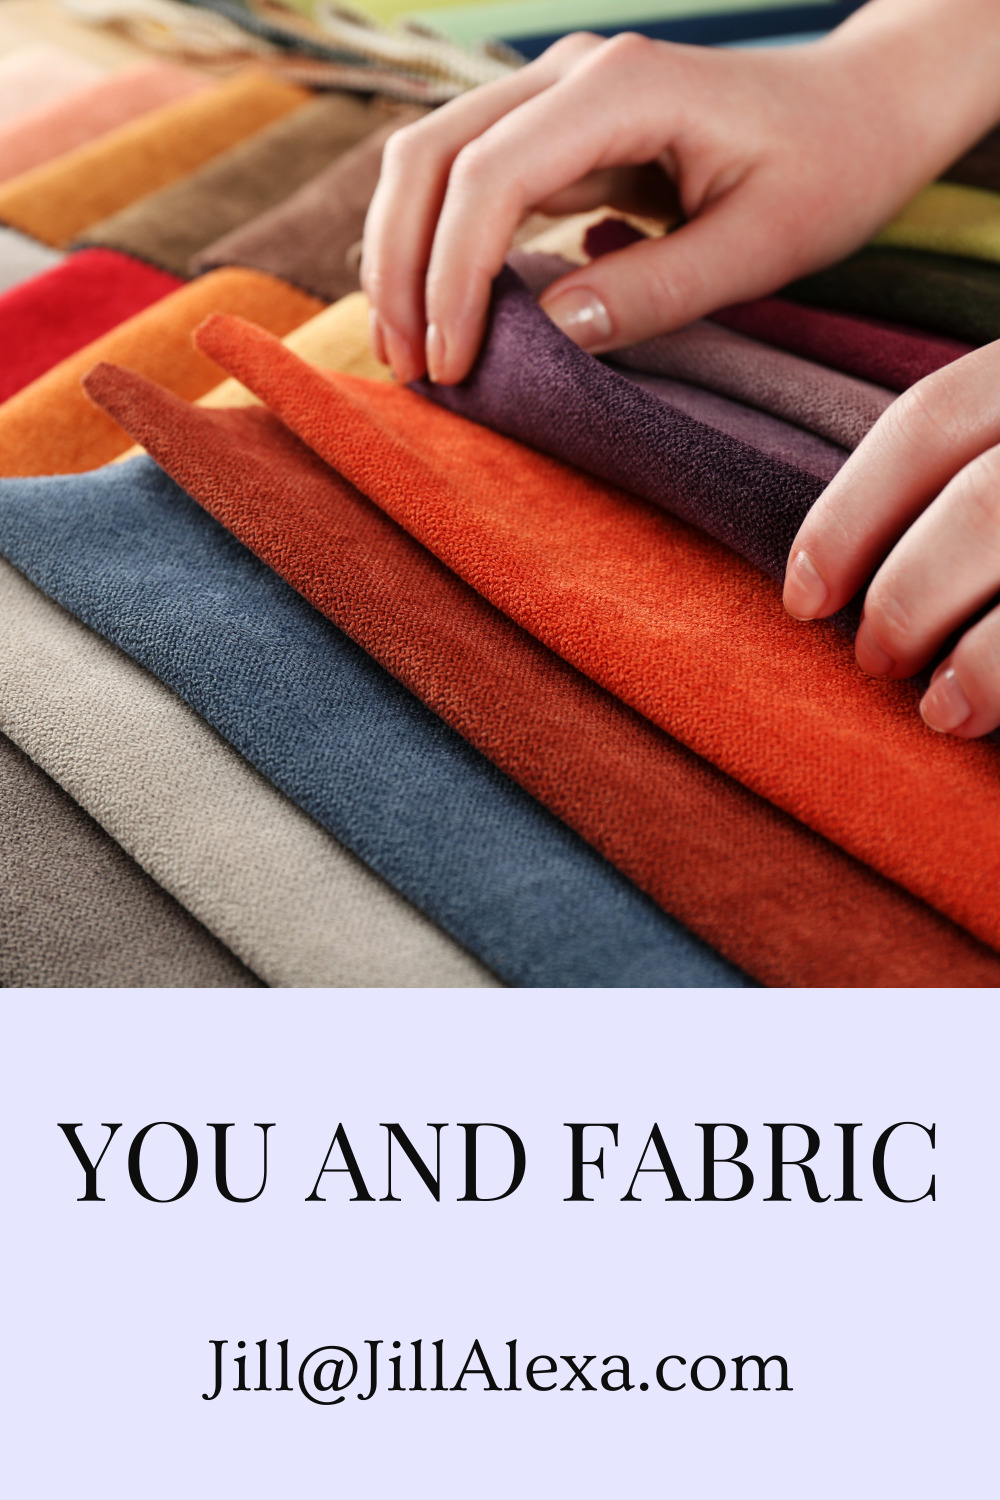 YOU AND FABRIC - are you interested in fabric and sewing, Knitting, Painting, Home Decor. There are so many thing one can do to keep from being bored or lonely.